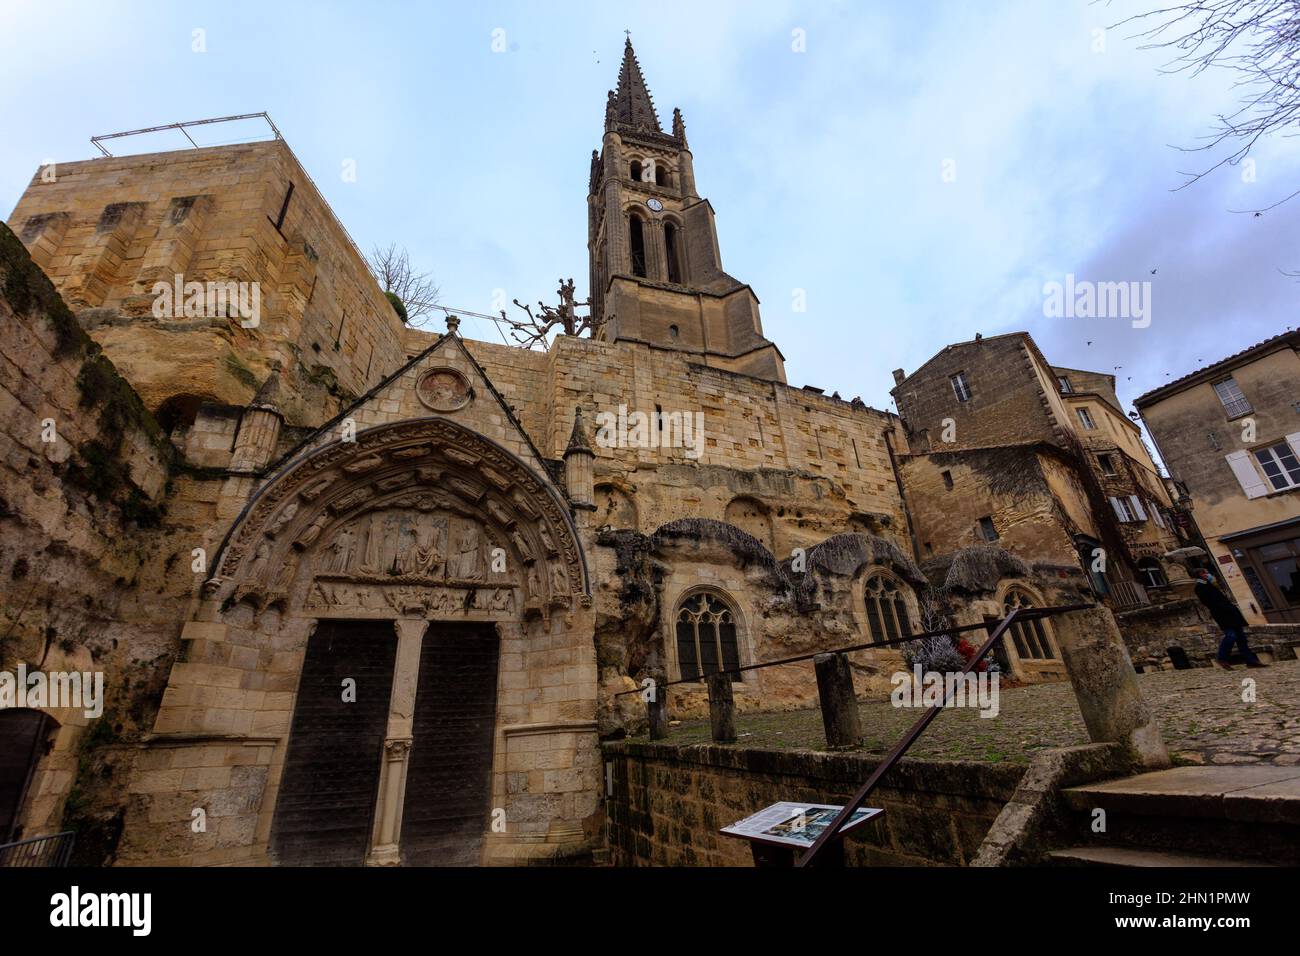 Saint Emilion  Monolithic church was partly constructed inside a cave in the twelfth century. It is a UNESCO World Heritage Site. France. Stock Photo